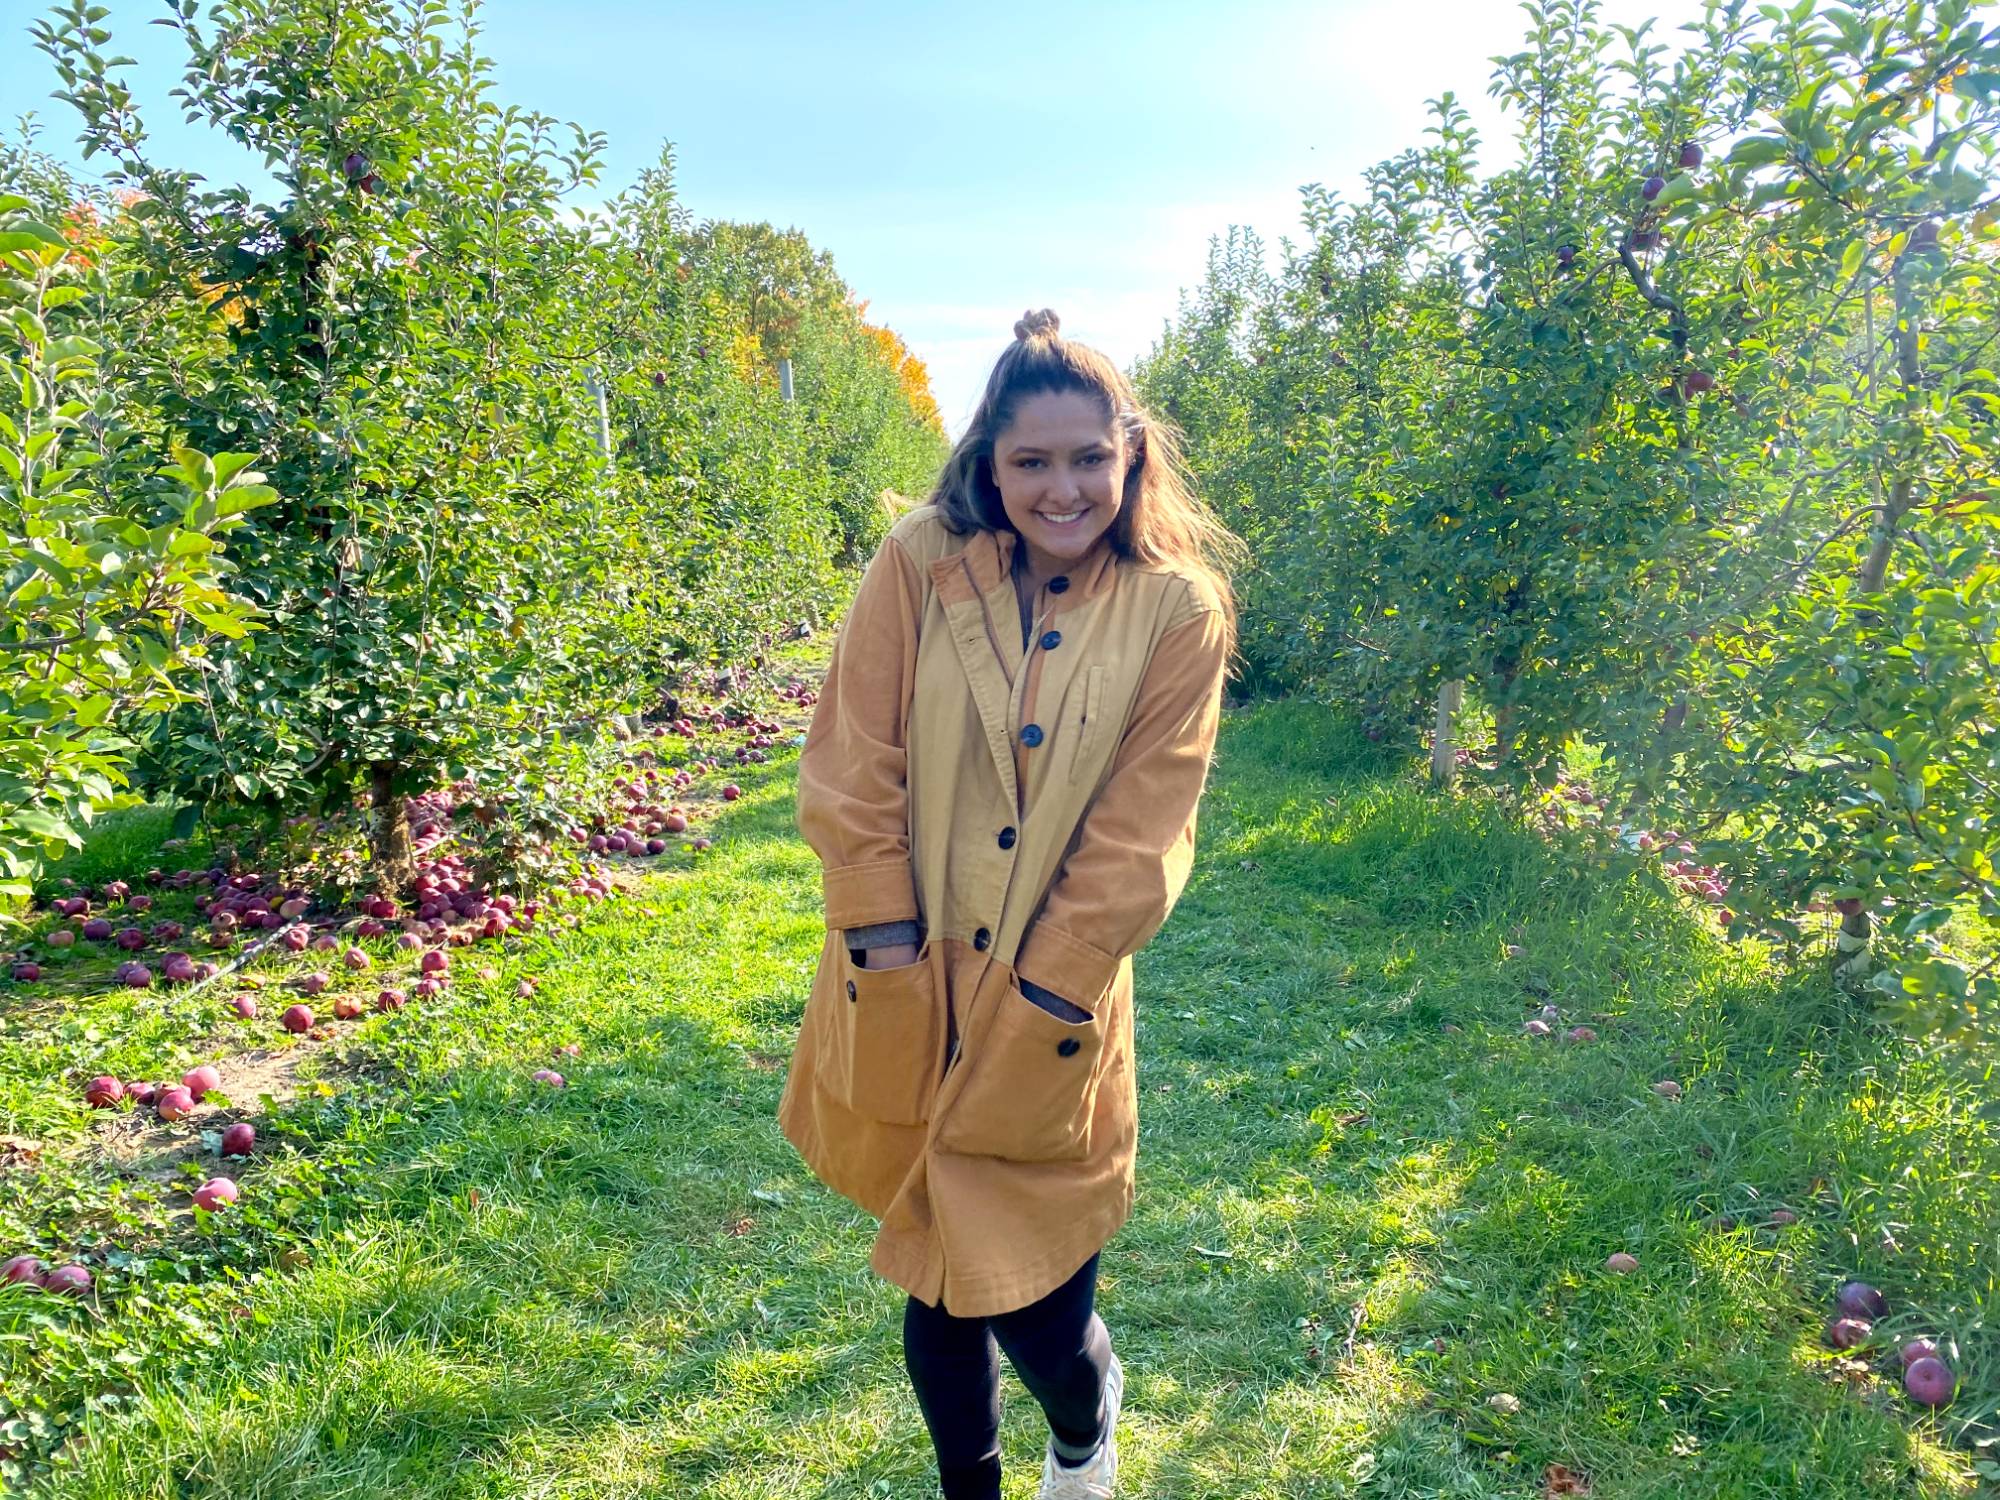 girl with brown hair and a tan coat standing in an apple orchard